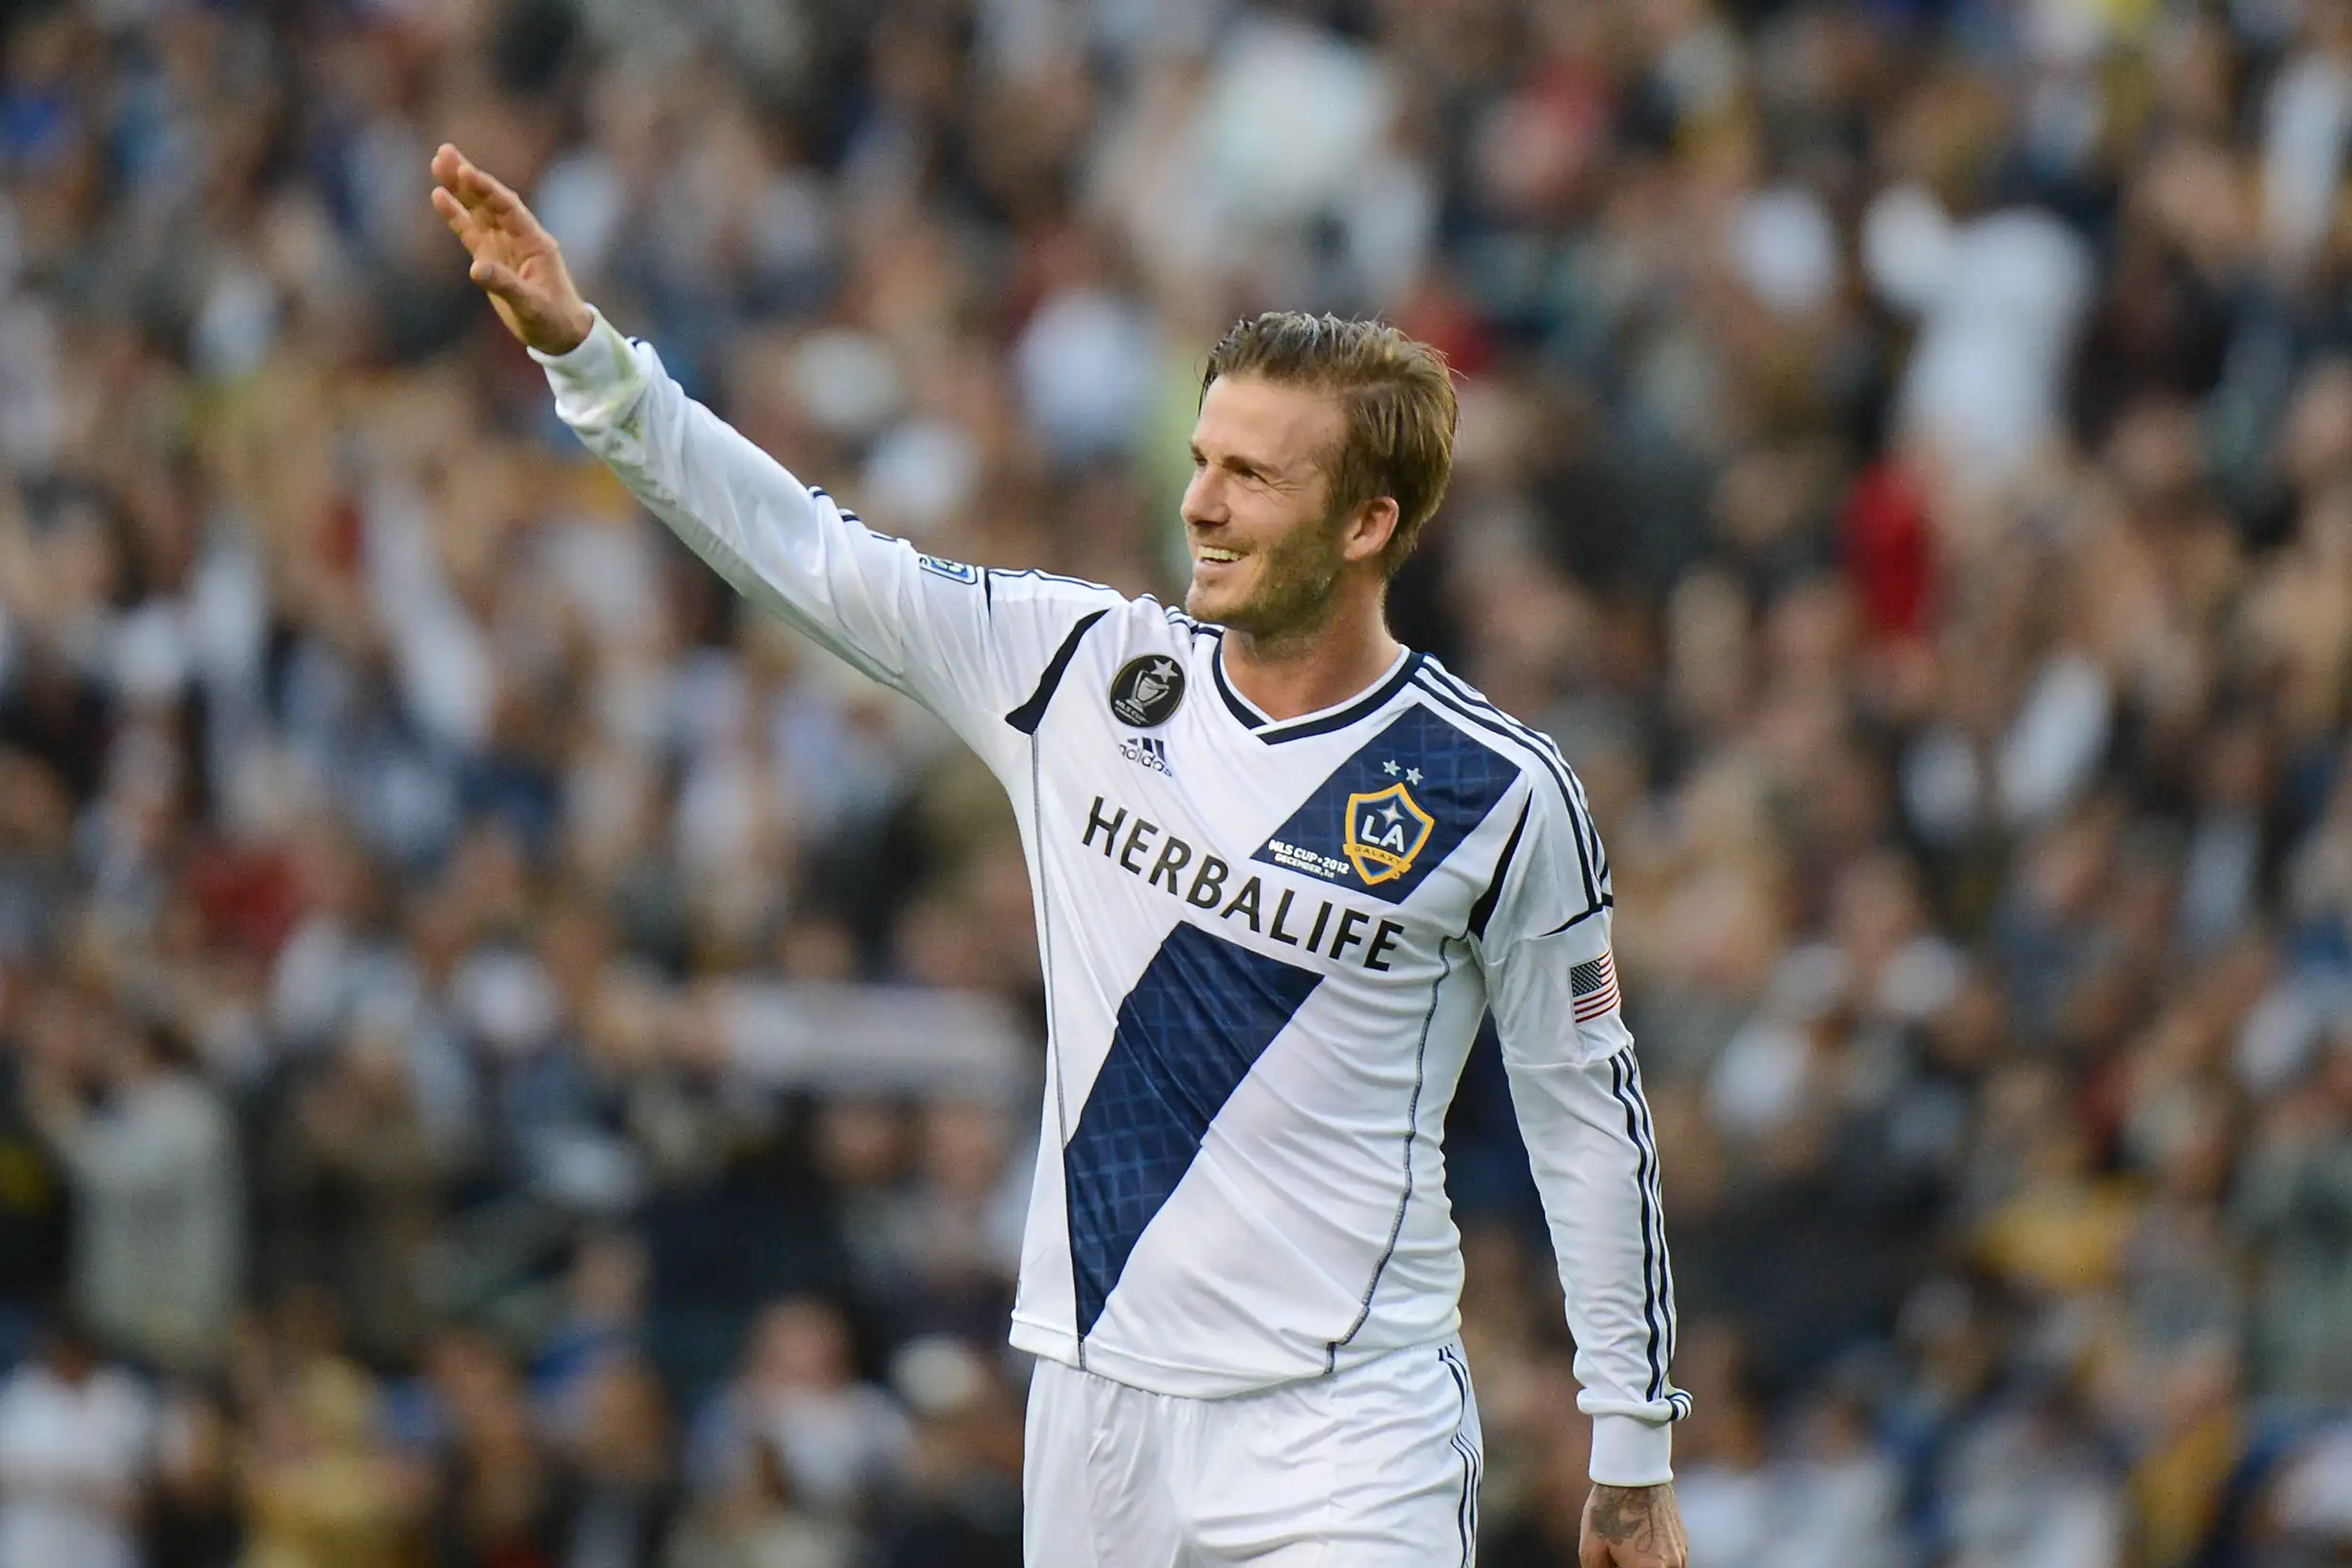 David Beckham waves to fans as he walks off the pitch after the Los Angeles Galaxy defeat the Huston Dynamo in the Major League Soccer (MLS) Cup, December 1, 2012 in Carson, California. It was Beckham's last game with the Galaxy.